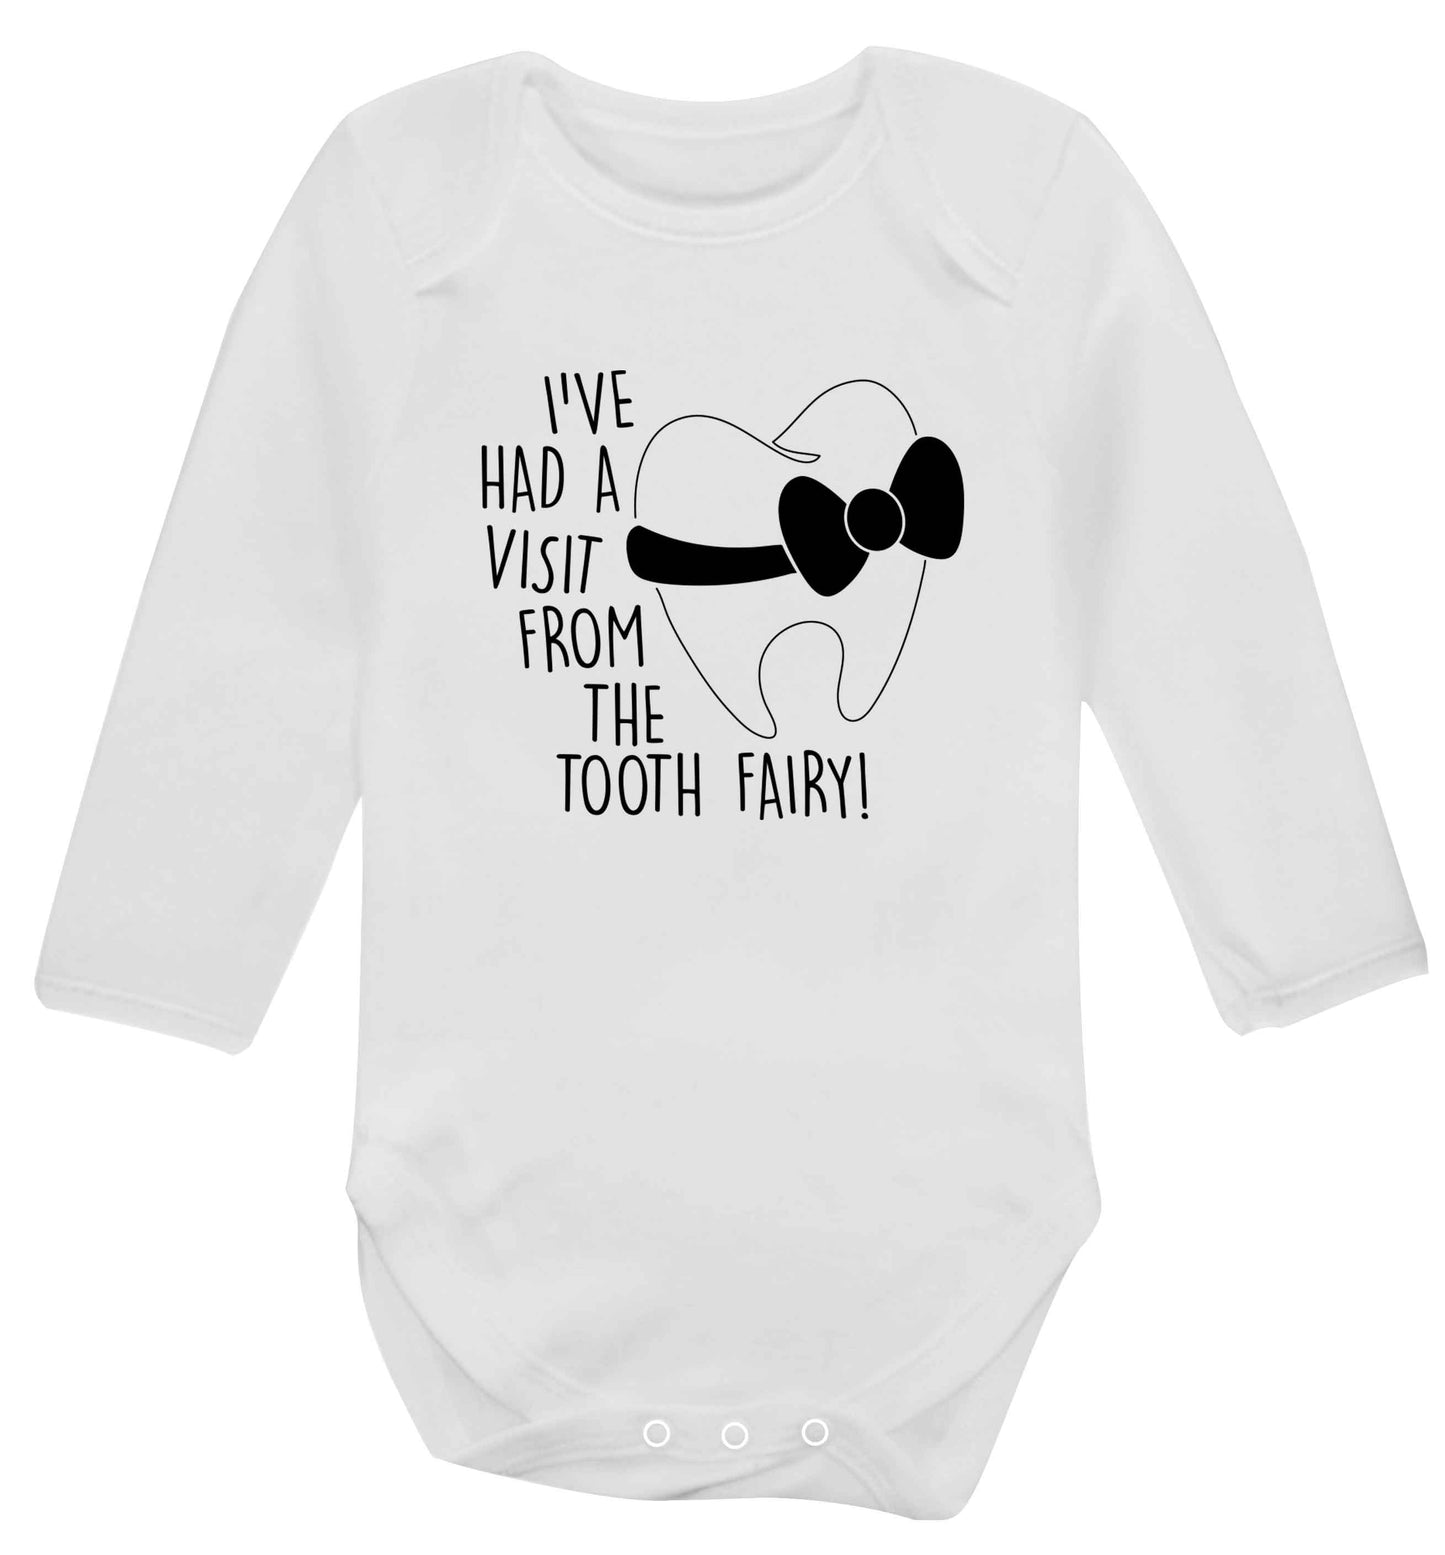 Visit From Tooth Fairy baby vest long sleeved white 6-12 months